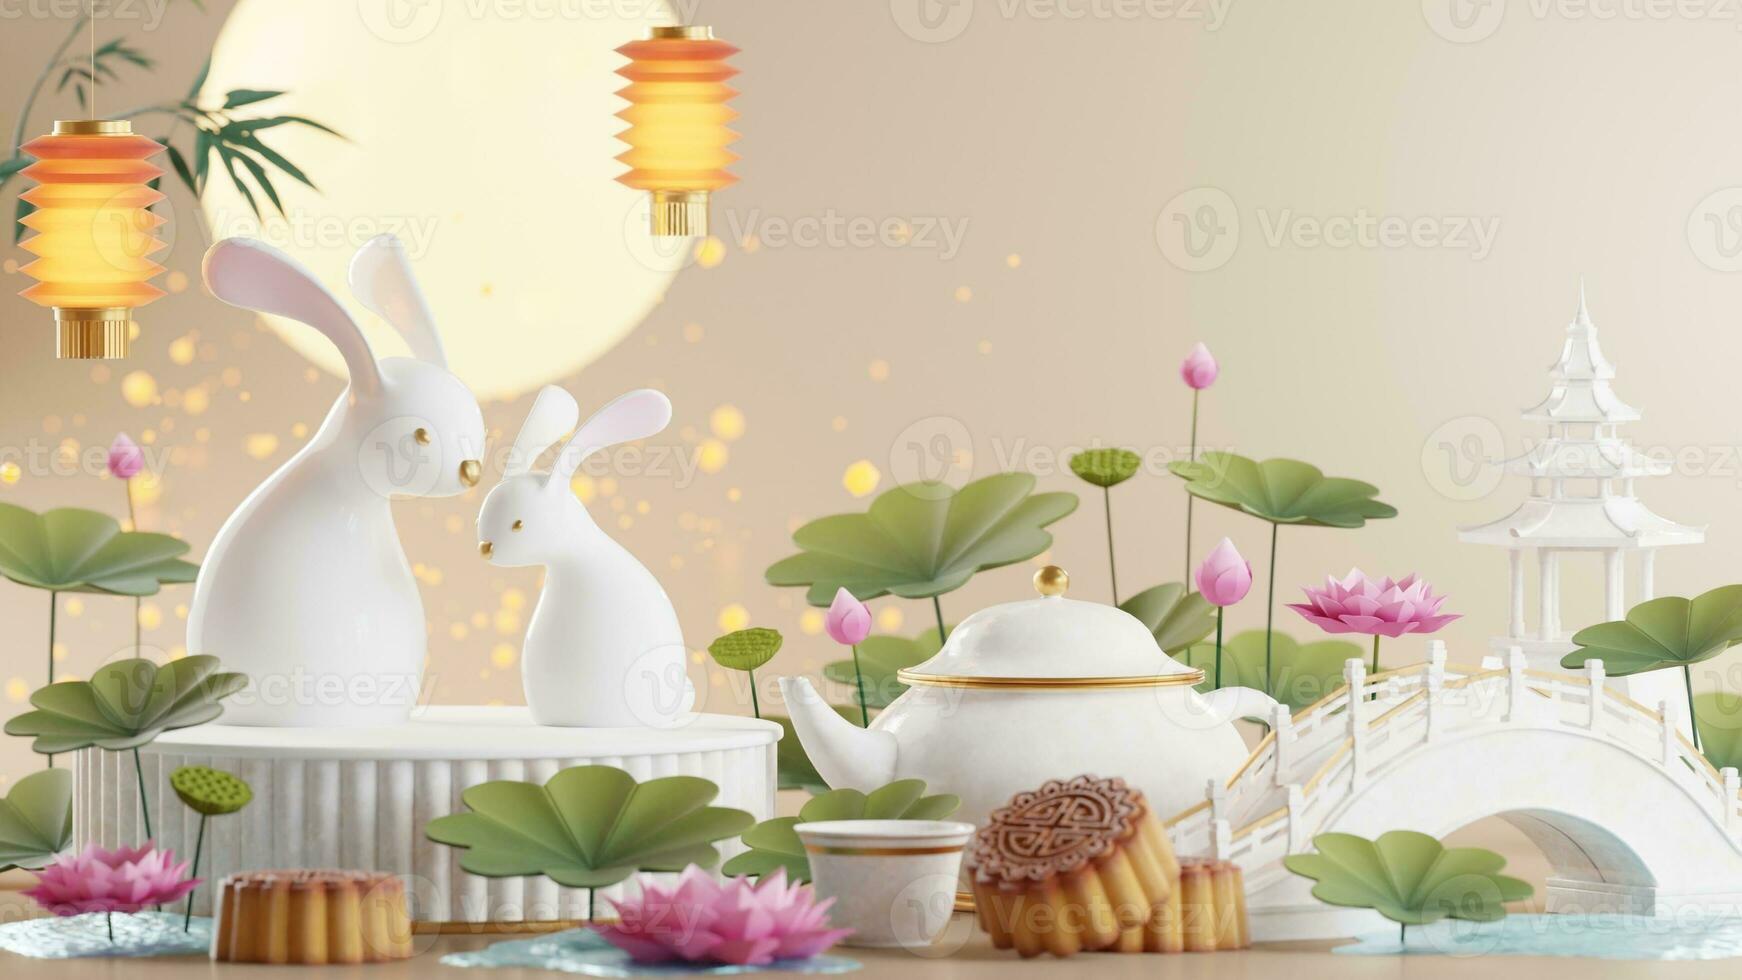 3D rendering for mid autumn festival holiday or chinese new year, chinese festivals with,lanterns, flower, moon, rabbit ,mooncake,tea pot and asian elements on background. photo